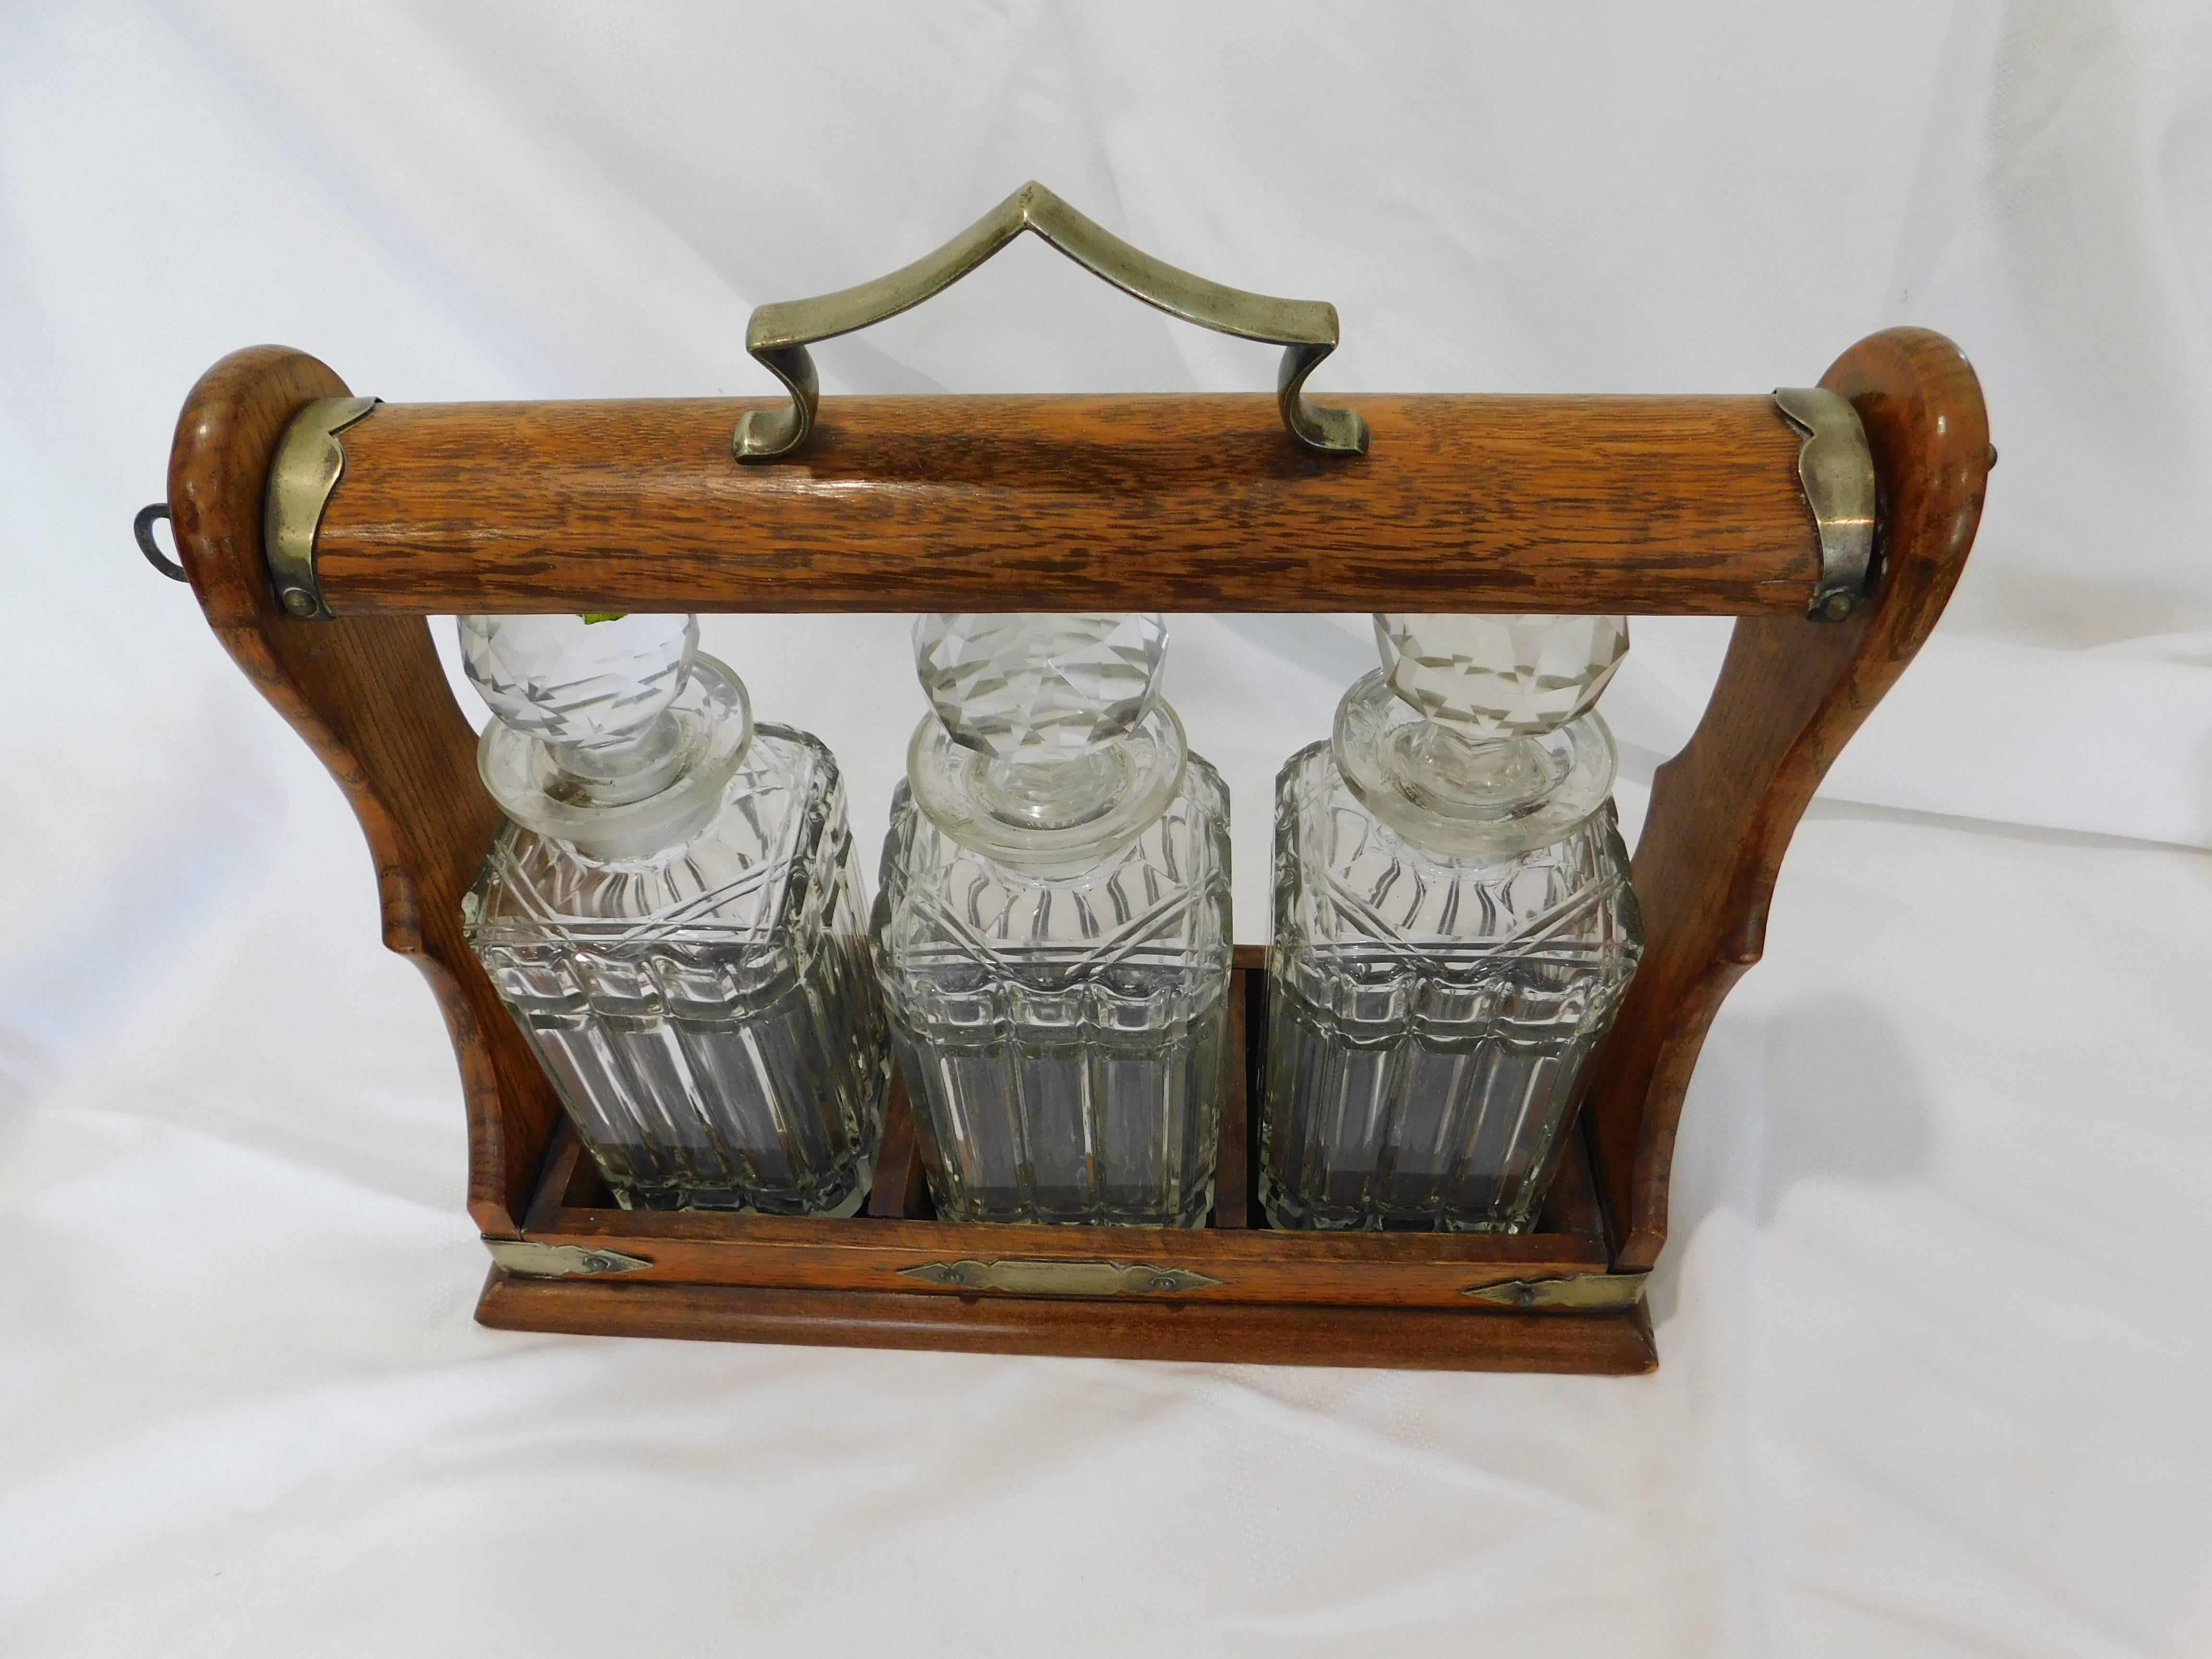 Original antique Victorian oak and silver metal tantalus with three crystal decanters. Comes with key to lock in the liquor or wine decanters.